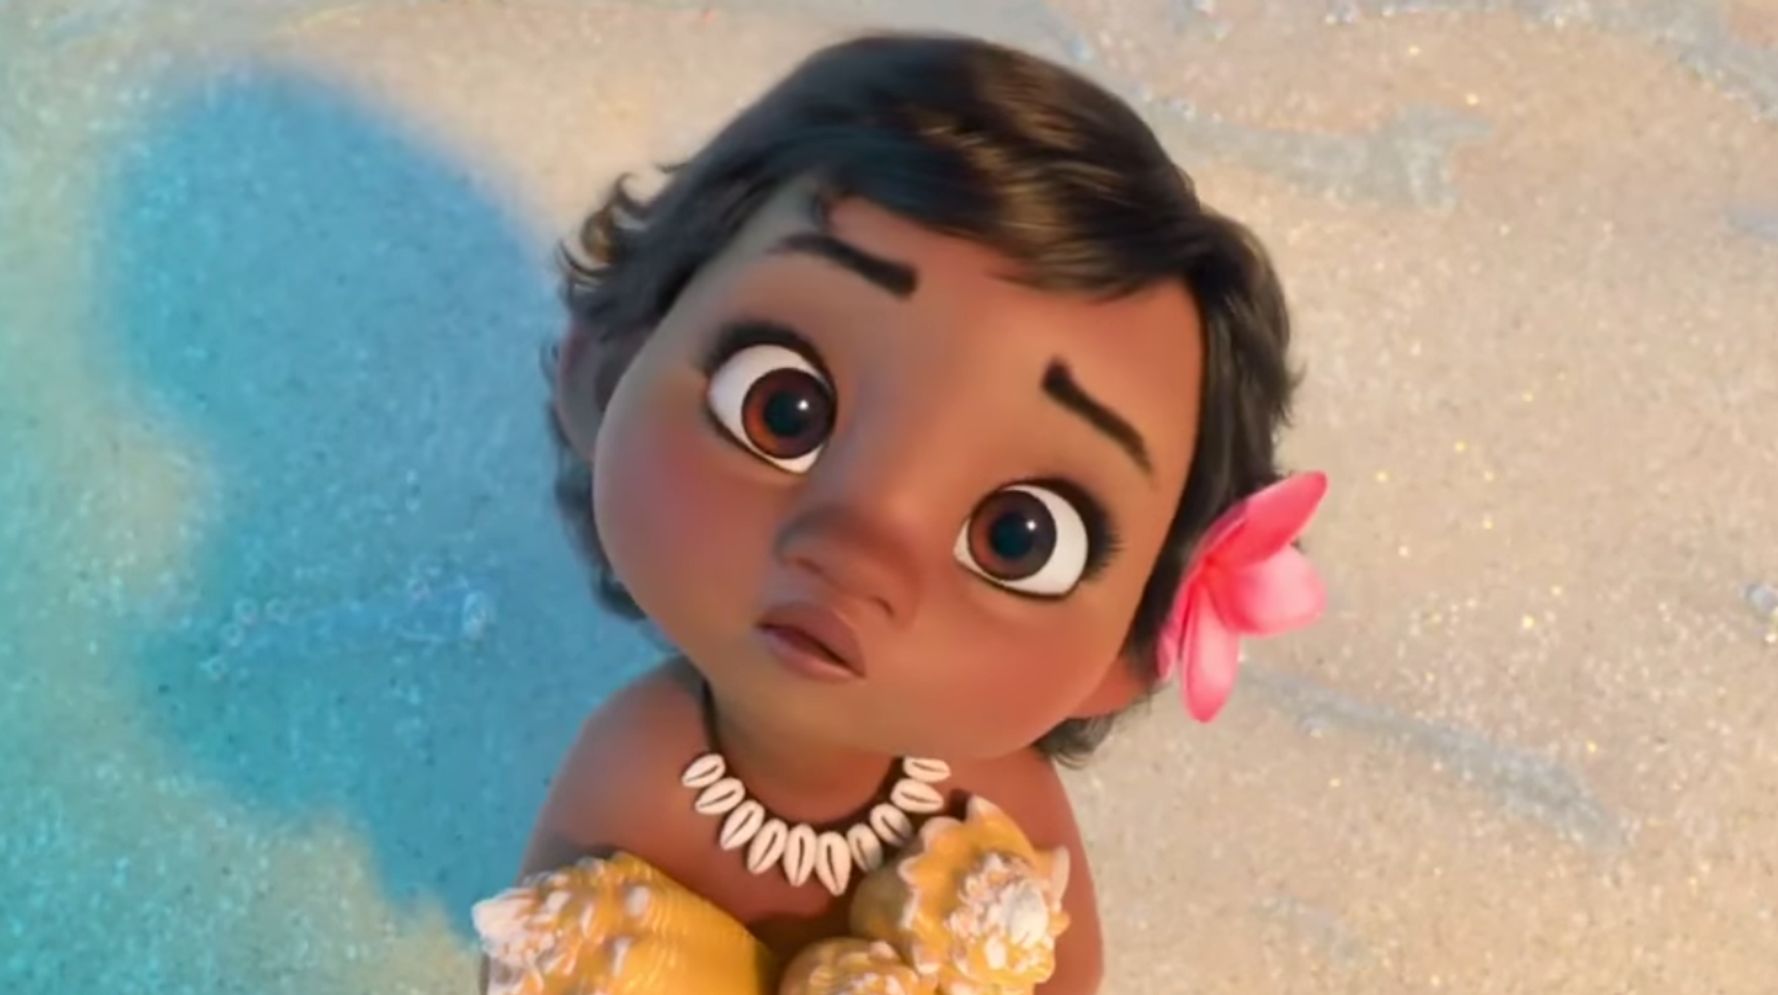 Baby Moana Is The Cutest Little Disney Princess Ever.